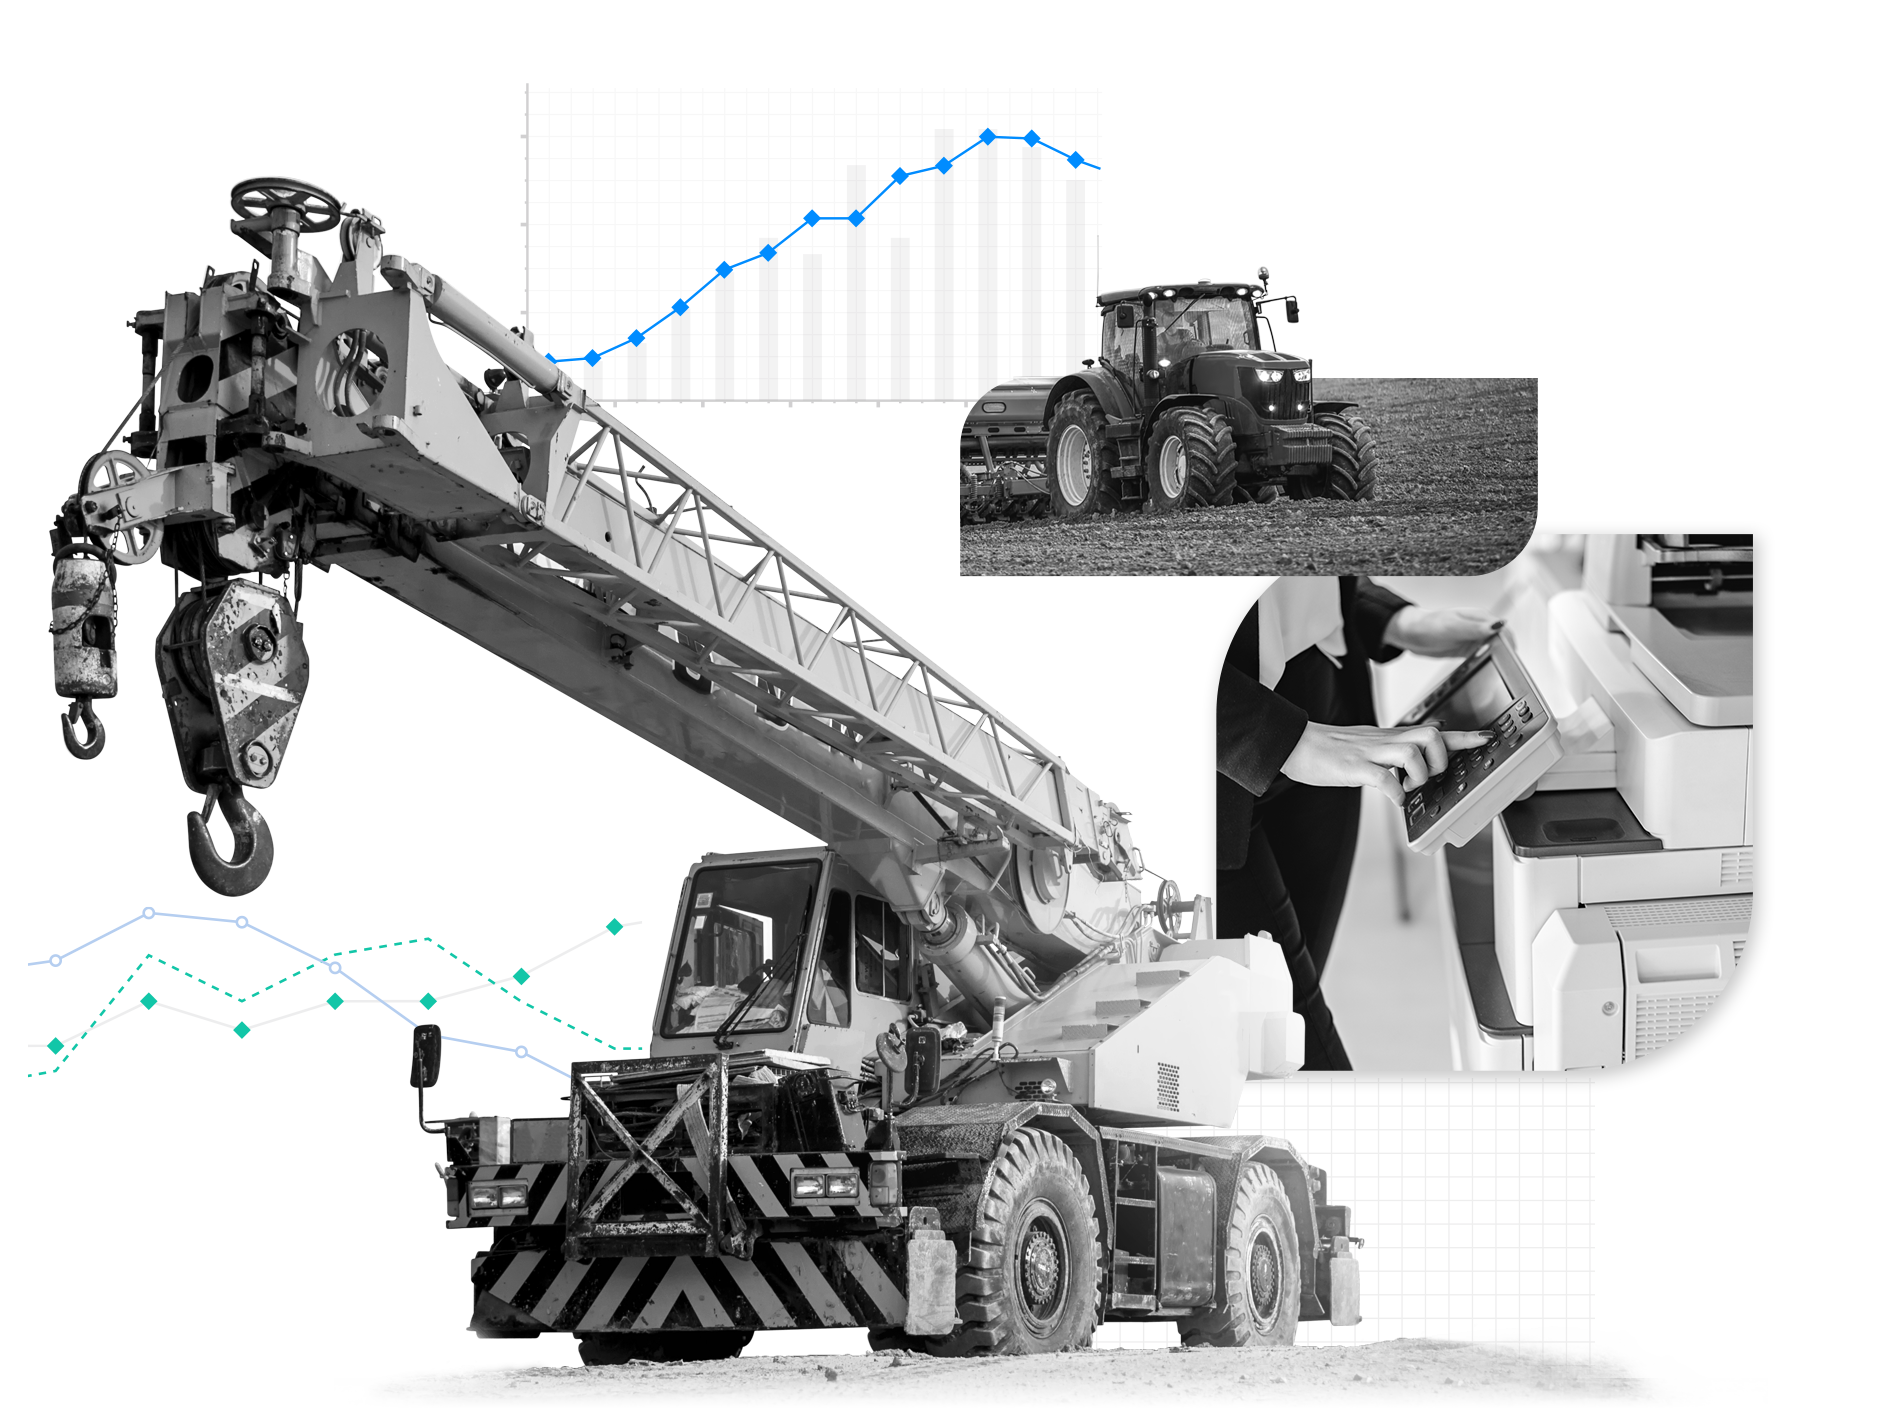 Equipment leasing software conceptual collage of industrial machines: a crane, a tractor, and a robotic arm, interspersed with line graphs, against a grid background.